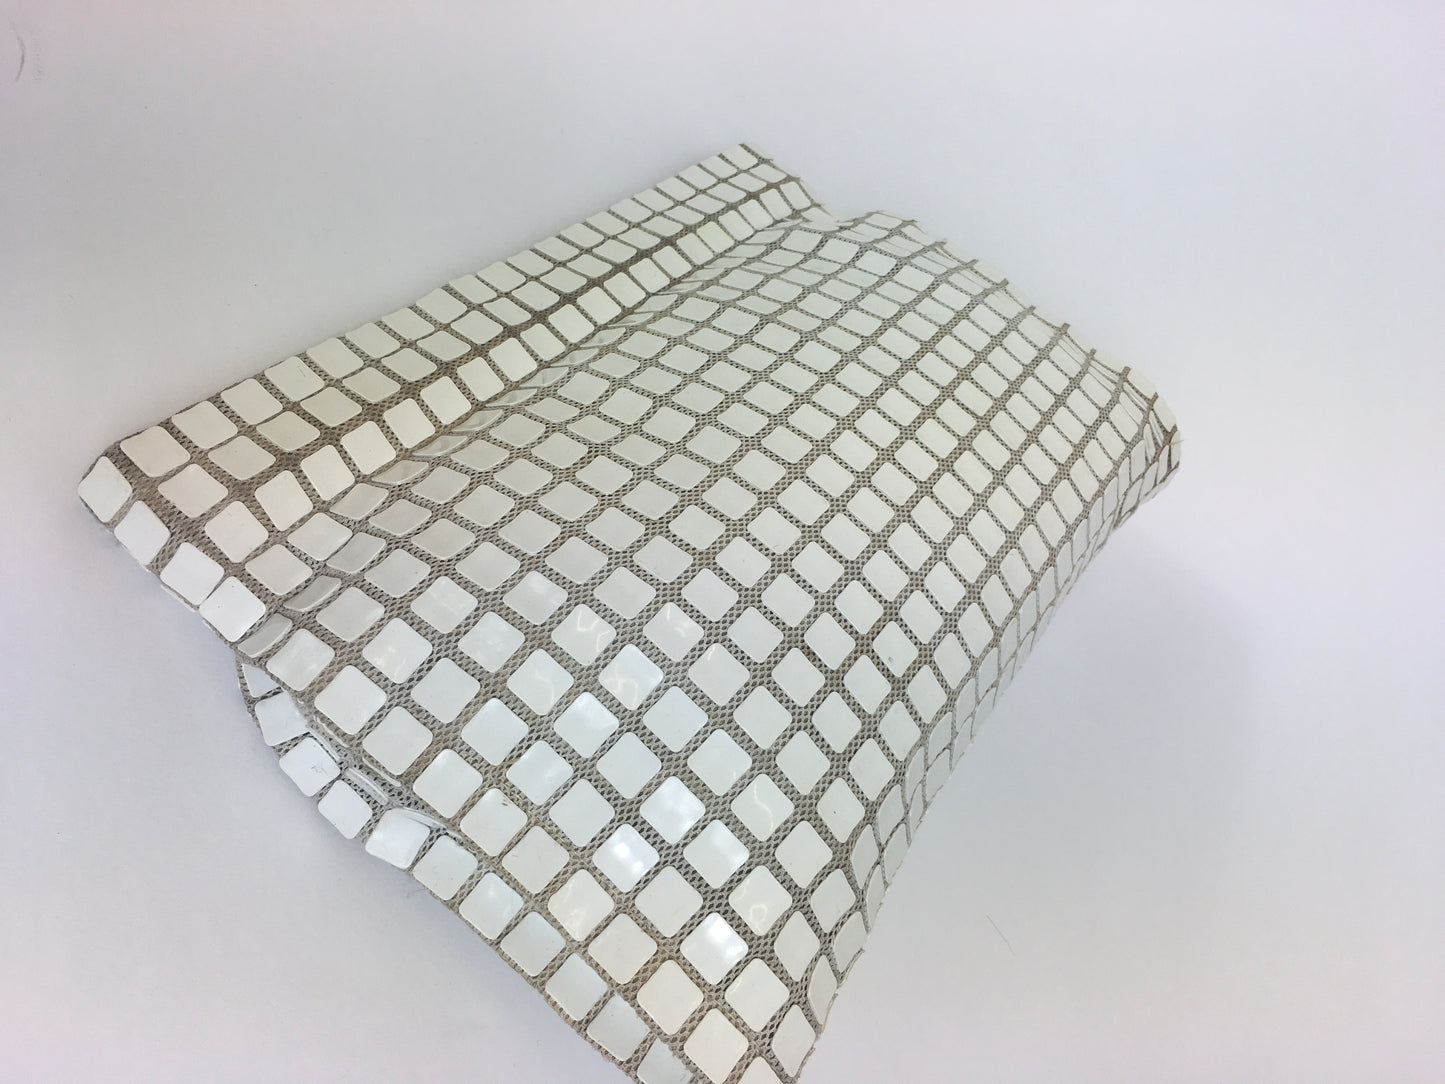 Original Late 1940’s Early 1950’s White Tiled Clutch Handbag - With Magnetic Strip Closure